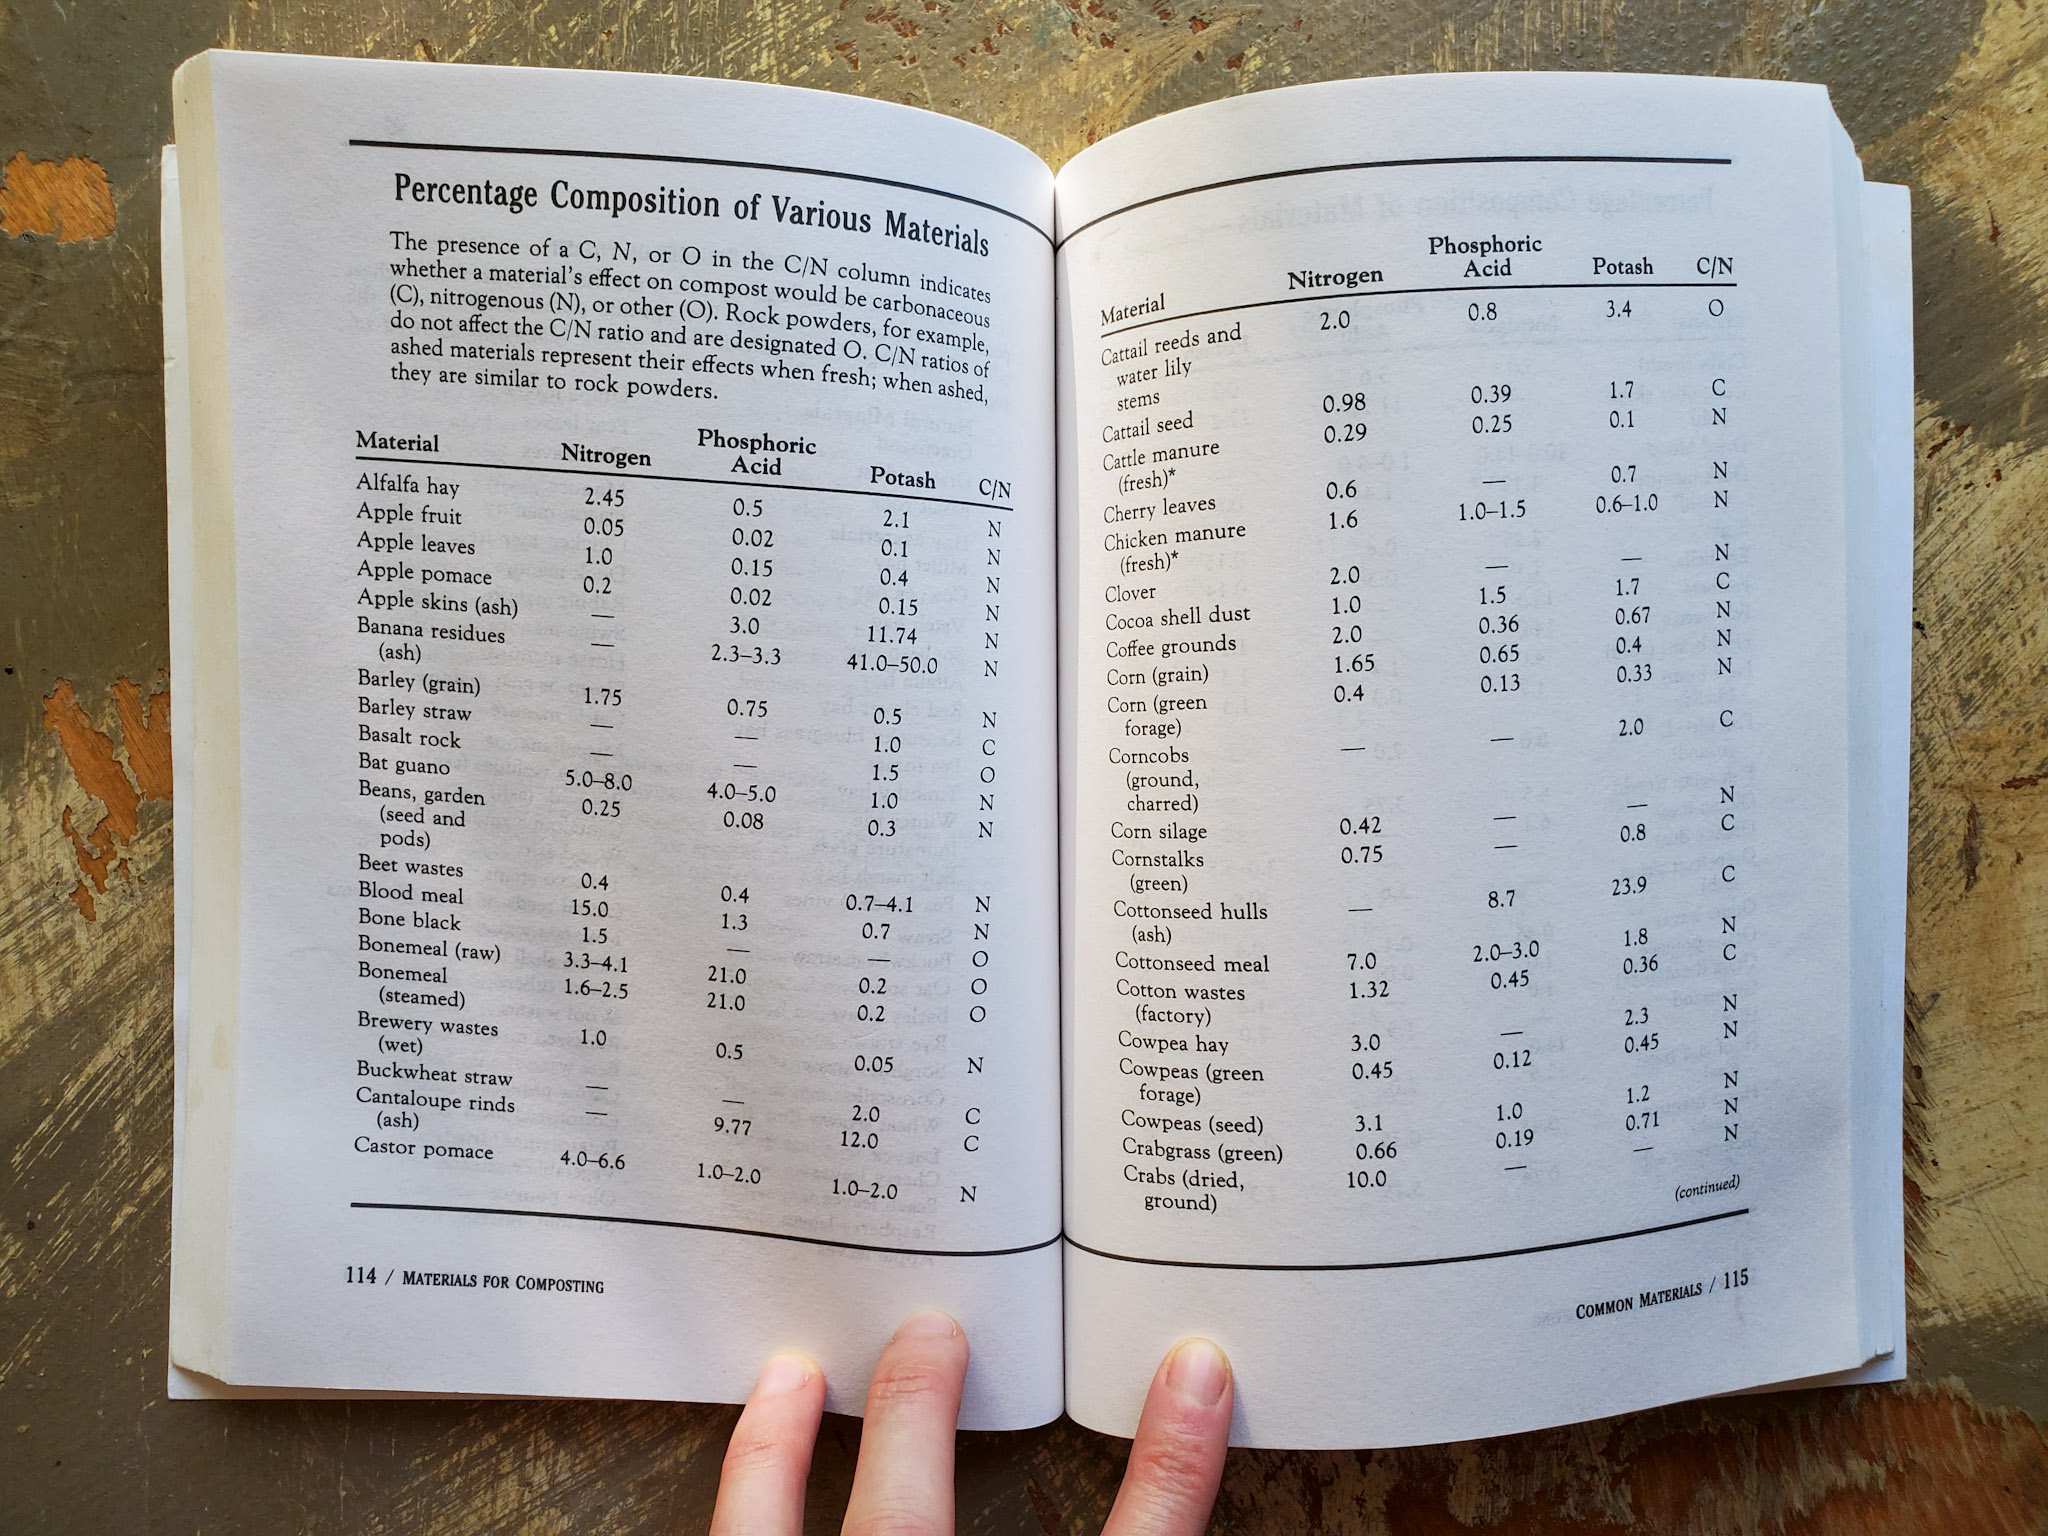 A great gardening book, the "Rodale Book of Composting" is open to a section that is a chart showing the macro nutrient percentage composition of various materials along with wether it as a carbon or nitrogen source. 